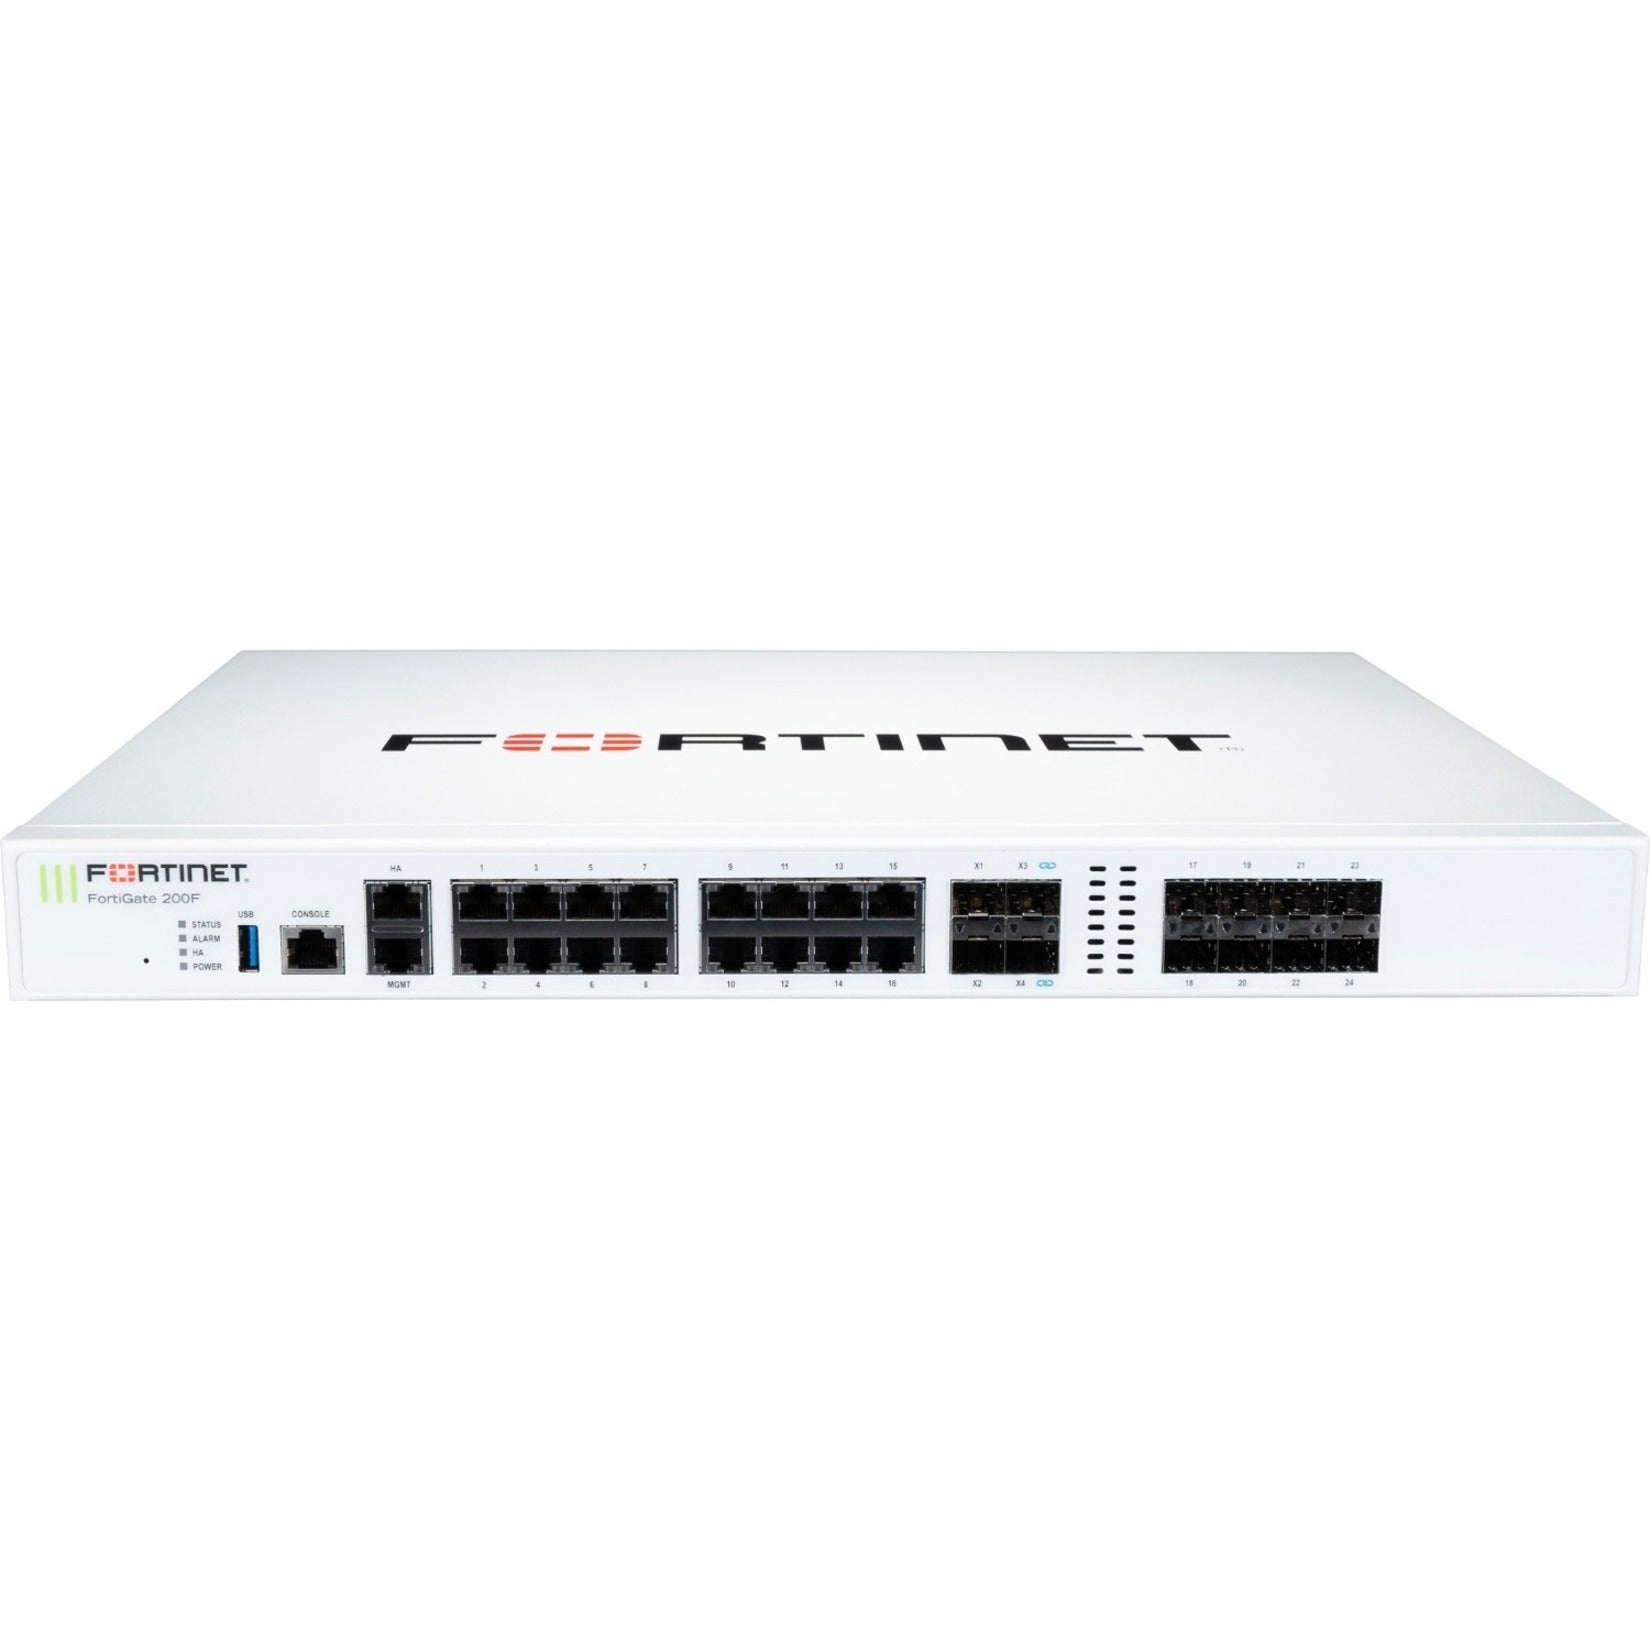 Fortinet FG-200F-BDL-950-12 FortiGate FG-200F Network Security/Firewall Appliance, 1 Year Warranty, 24x7 FortiCare and FortiGuard UTP